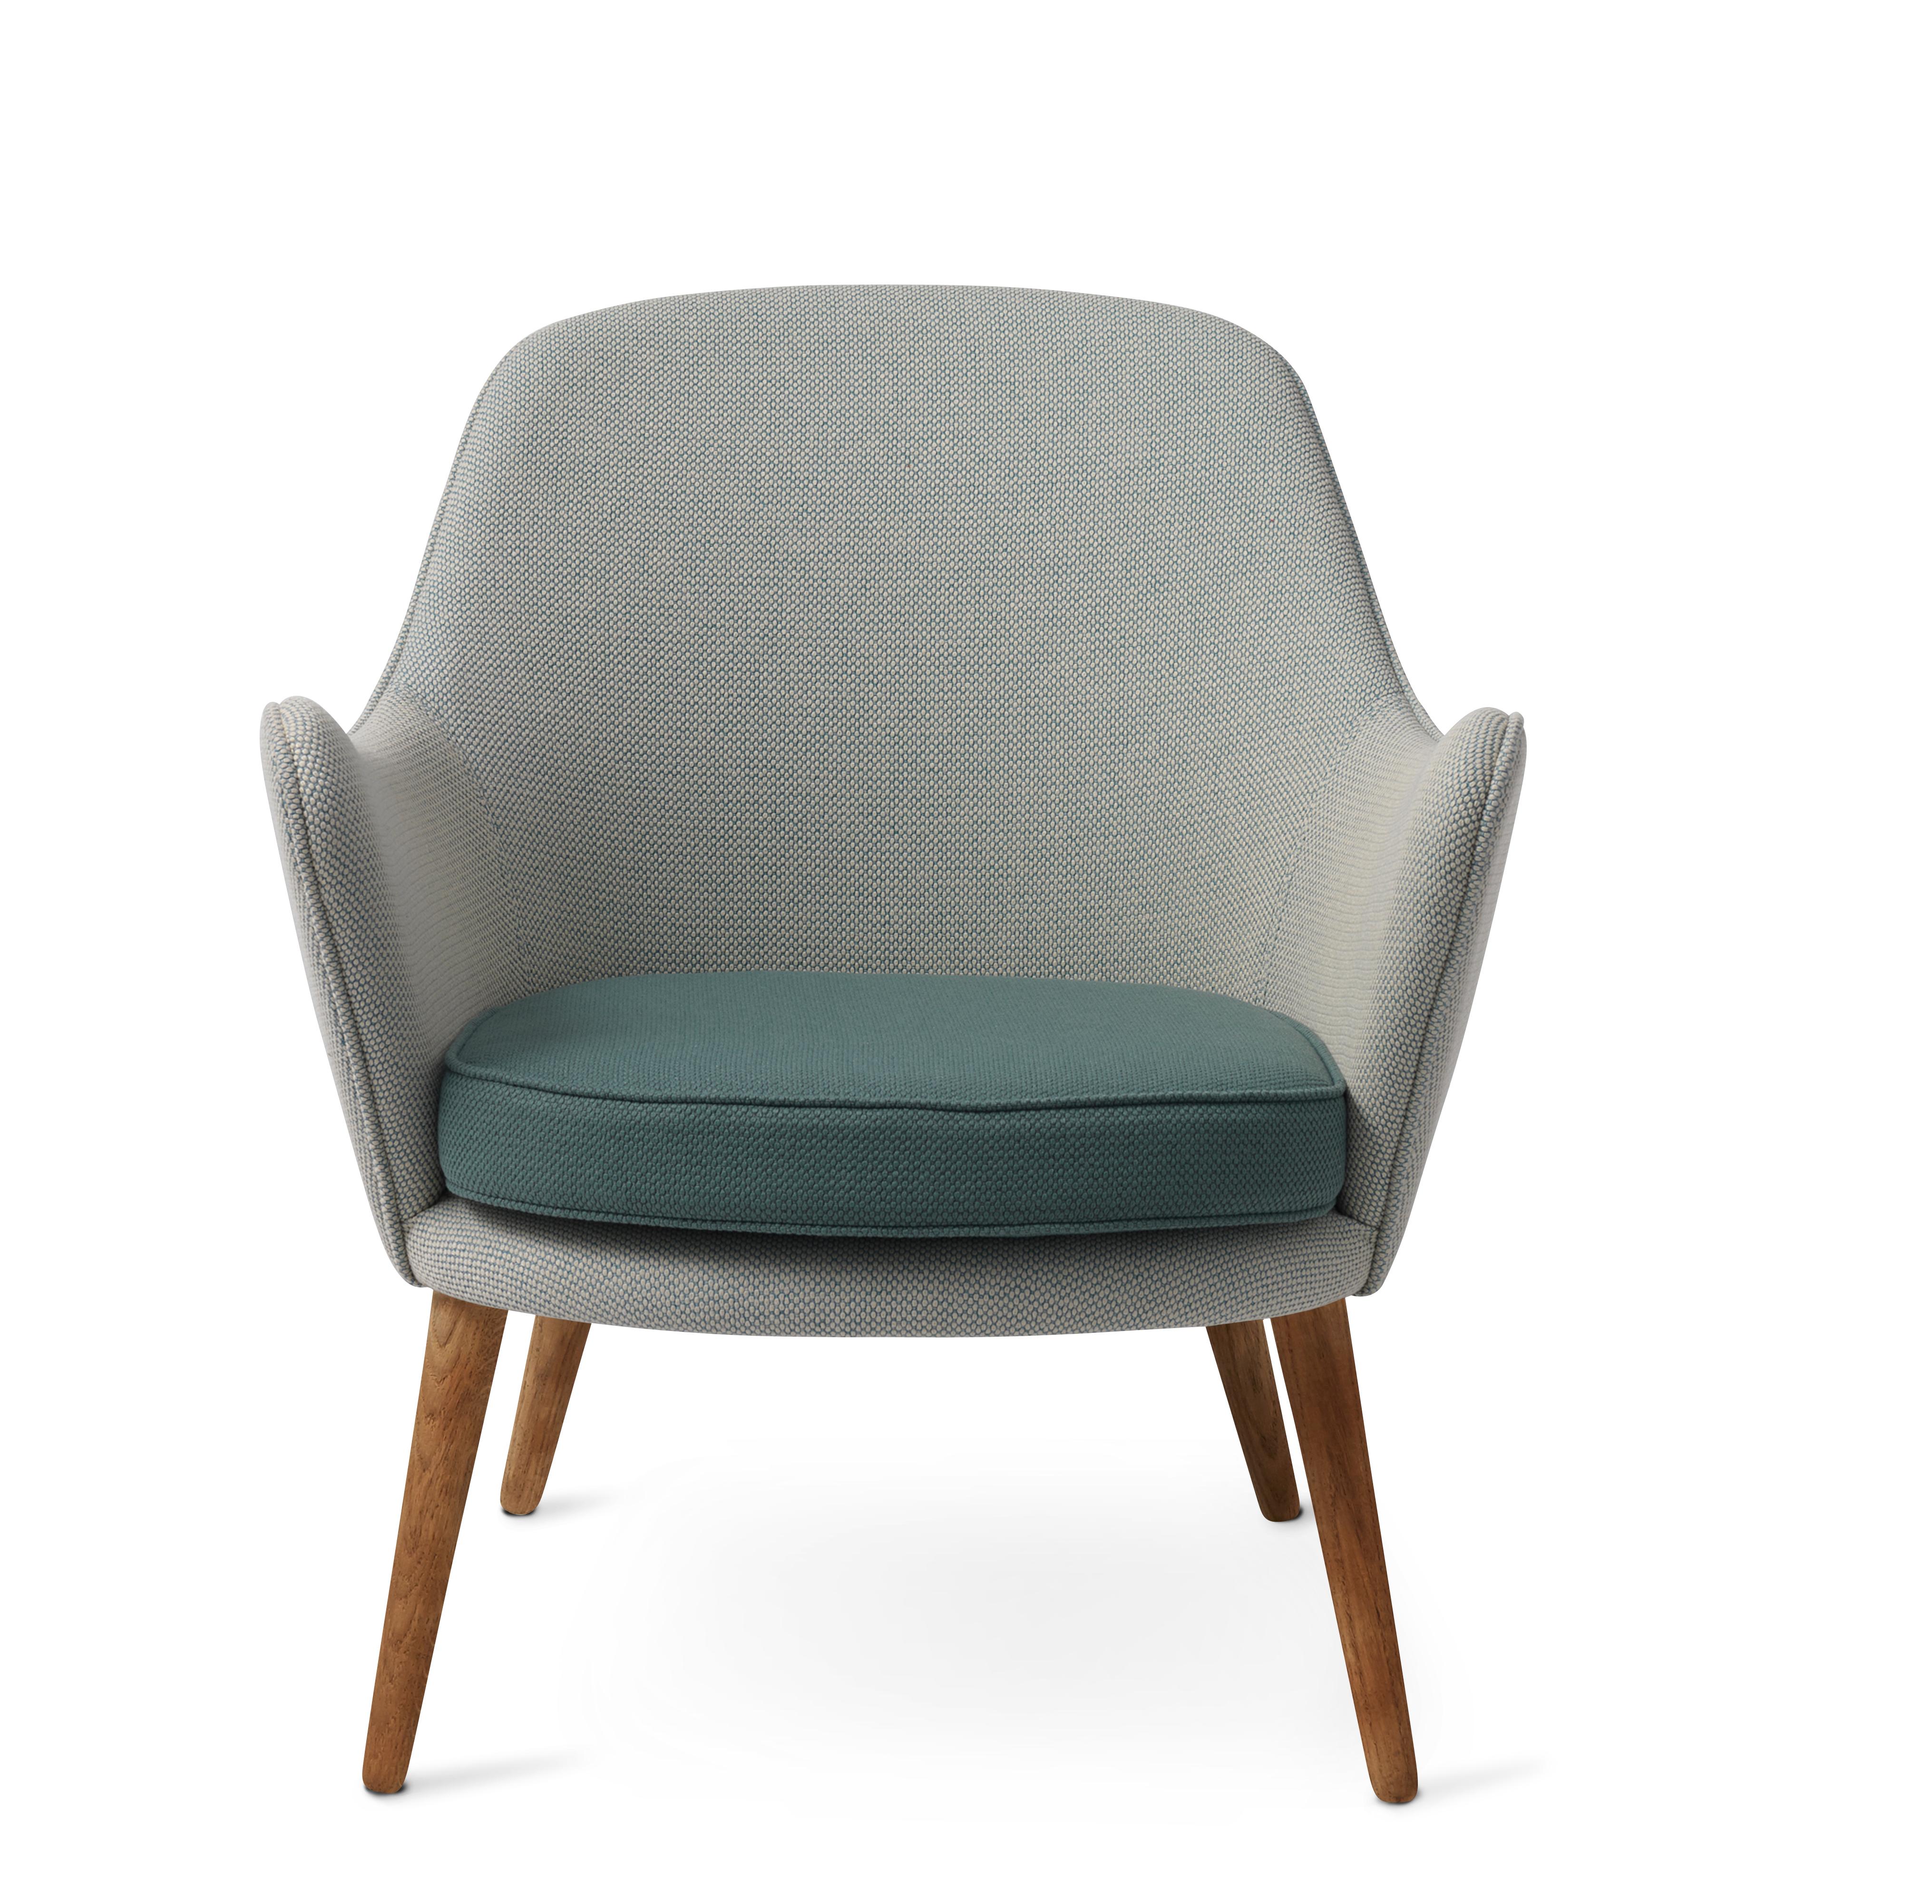 For Sale: Gray (Merit021/Merit017) Dwell Lounge Chair, by Hans Olsen from Warm Nordic